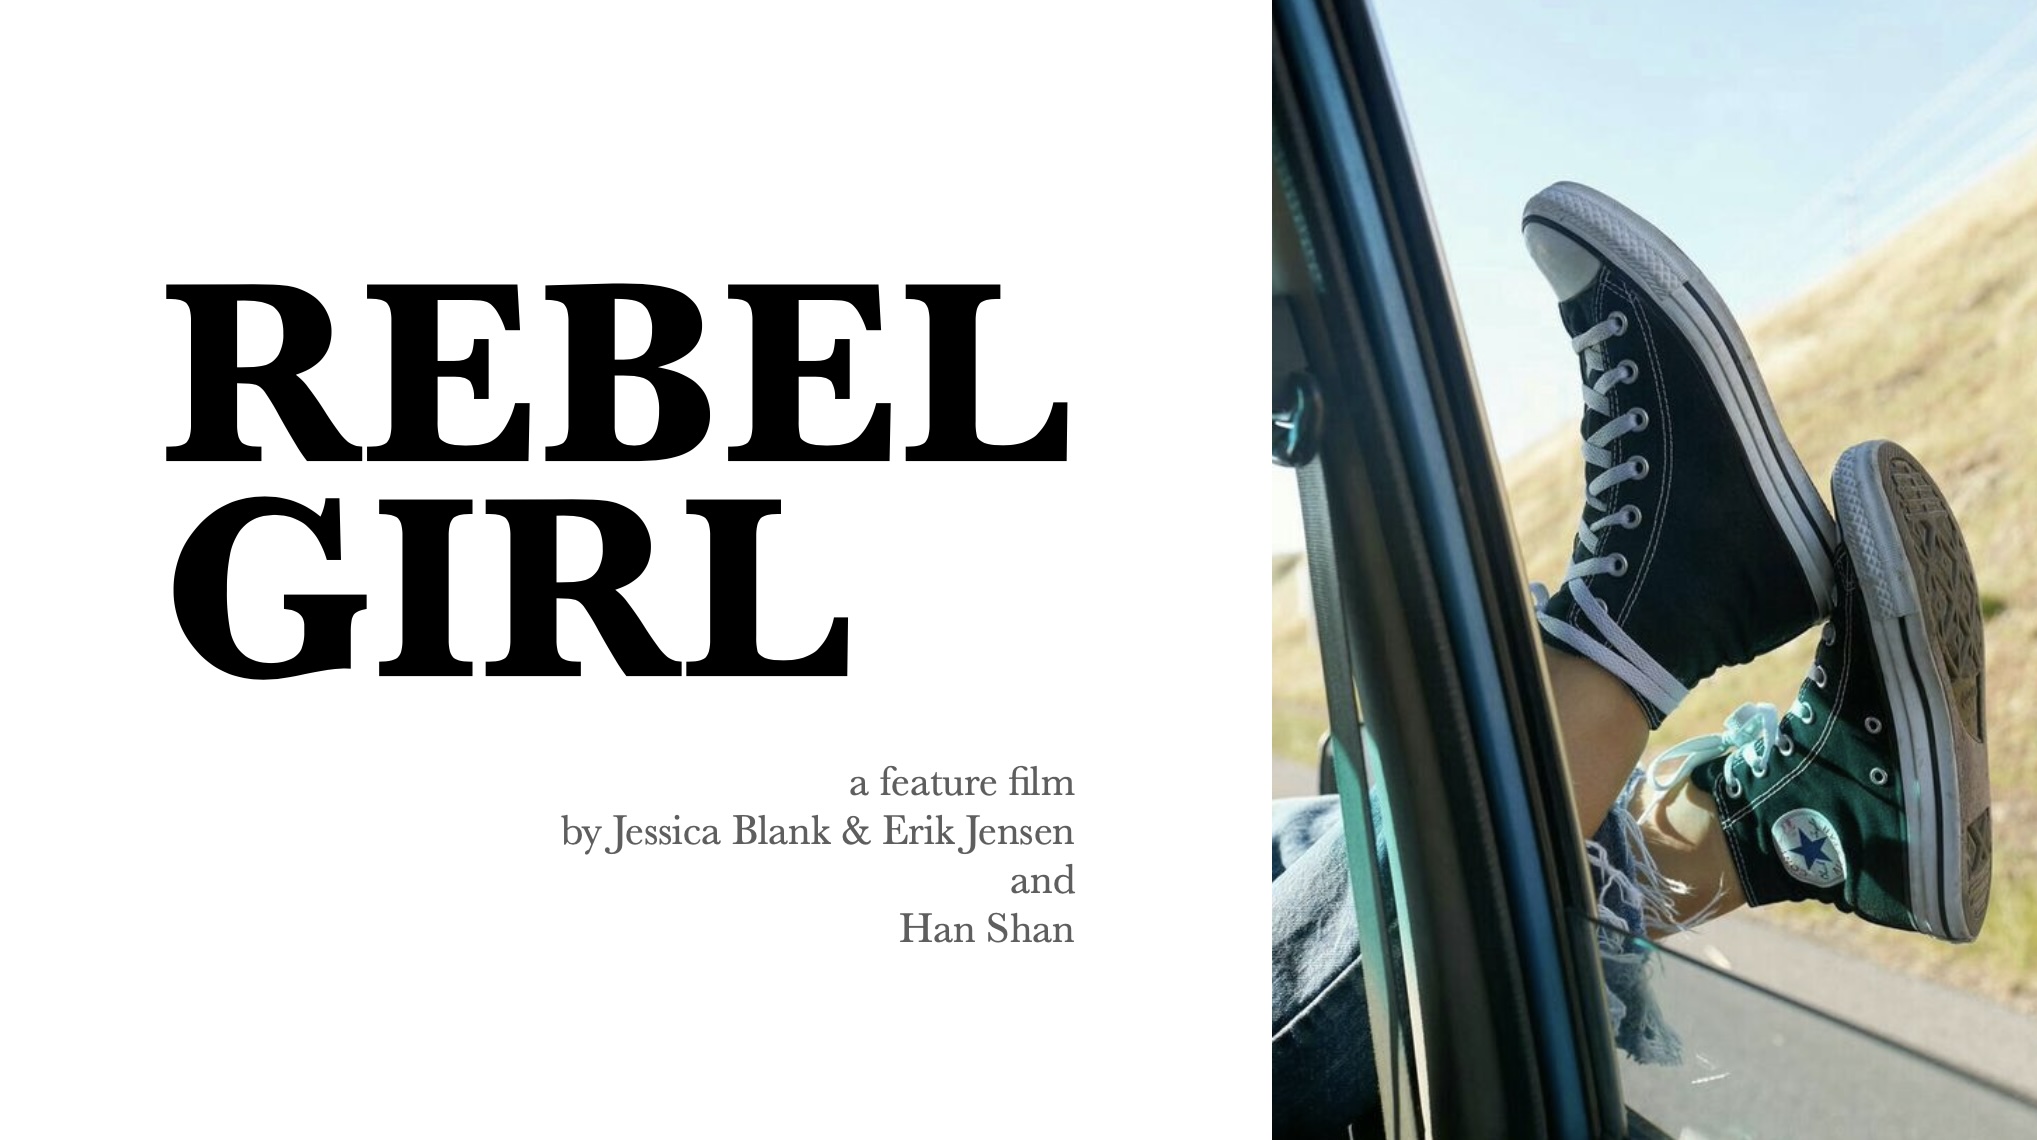 A girl wearing Converse shoes hanging her feet out the window a moving car. Title text "Rebel Girl. A feature film by Jessica Blank & Erik Jensen and Han Shan"